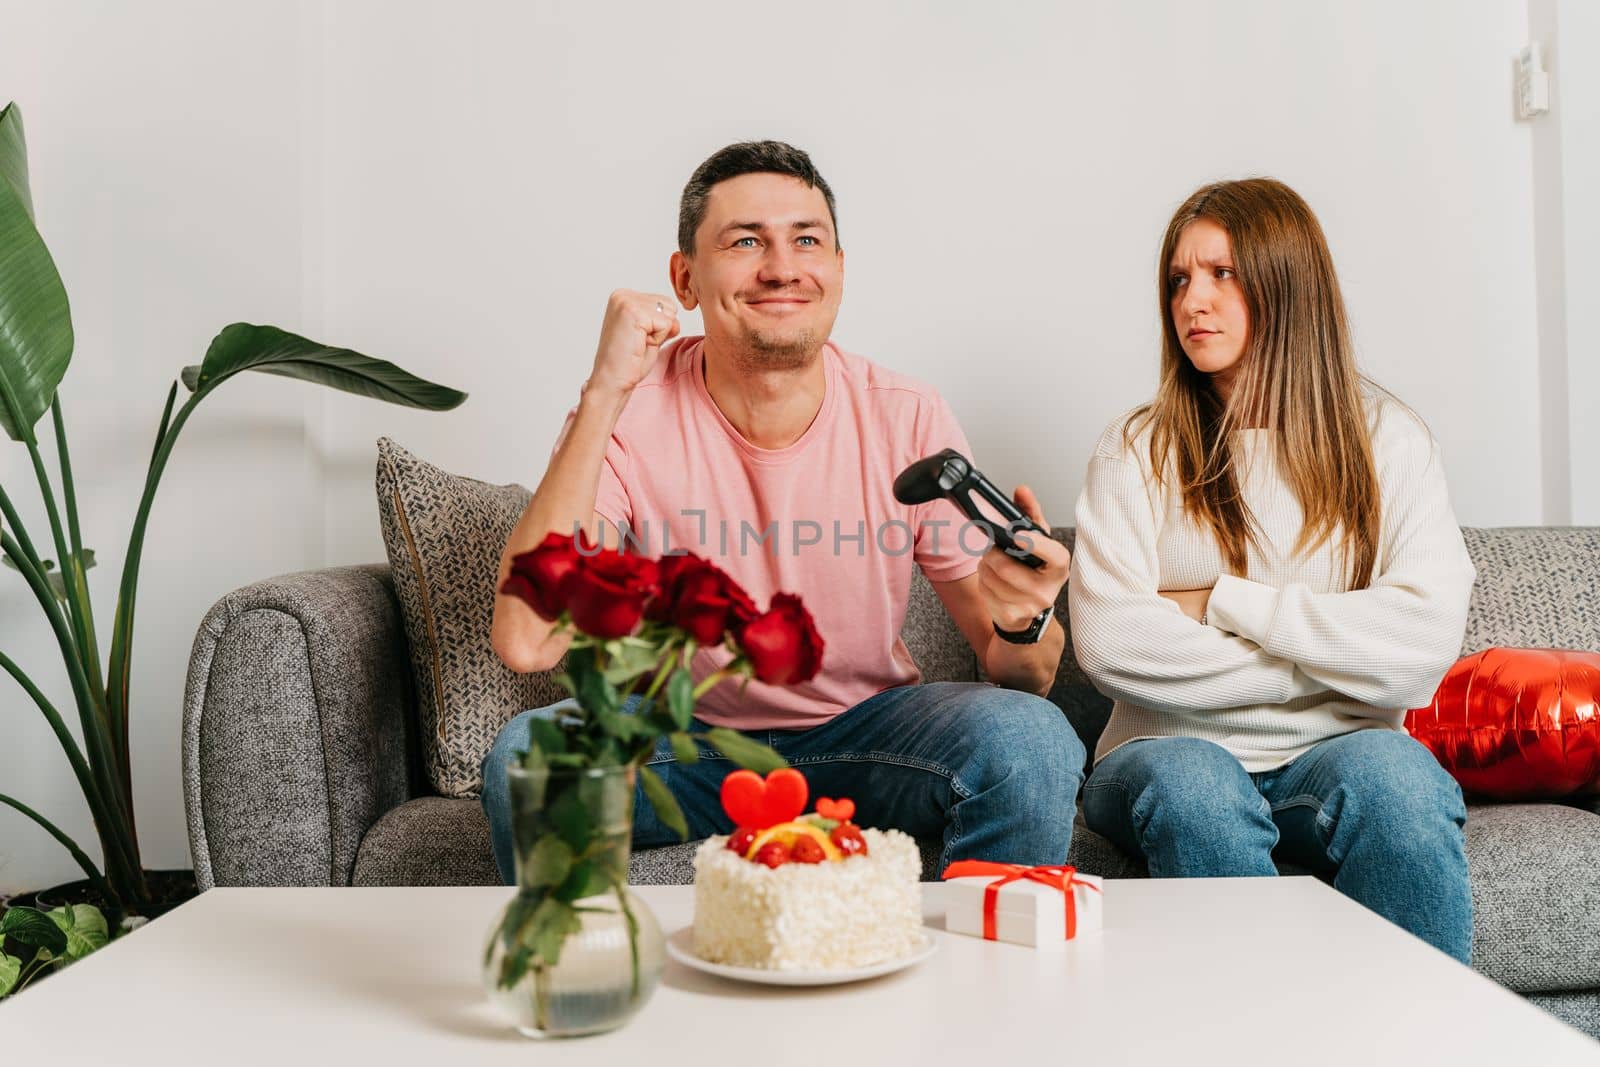 Beautiful young couple sitting on a couch, having a quarrel over romantic date on Valentine day. Man playing video games at gamepad, woman in anger.